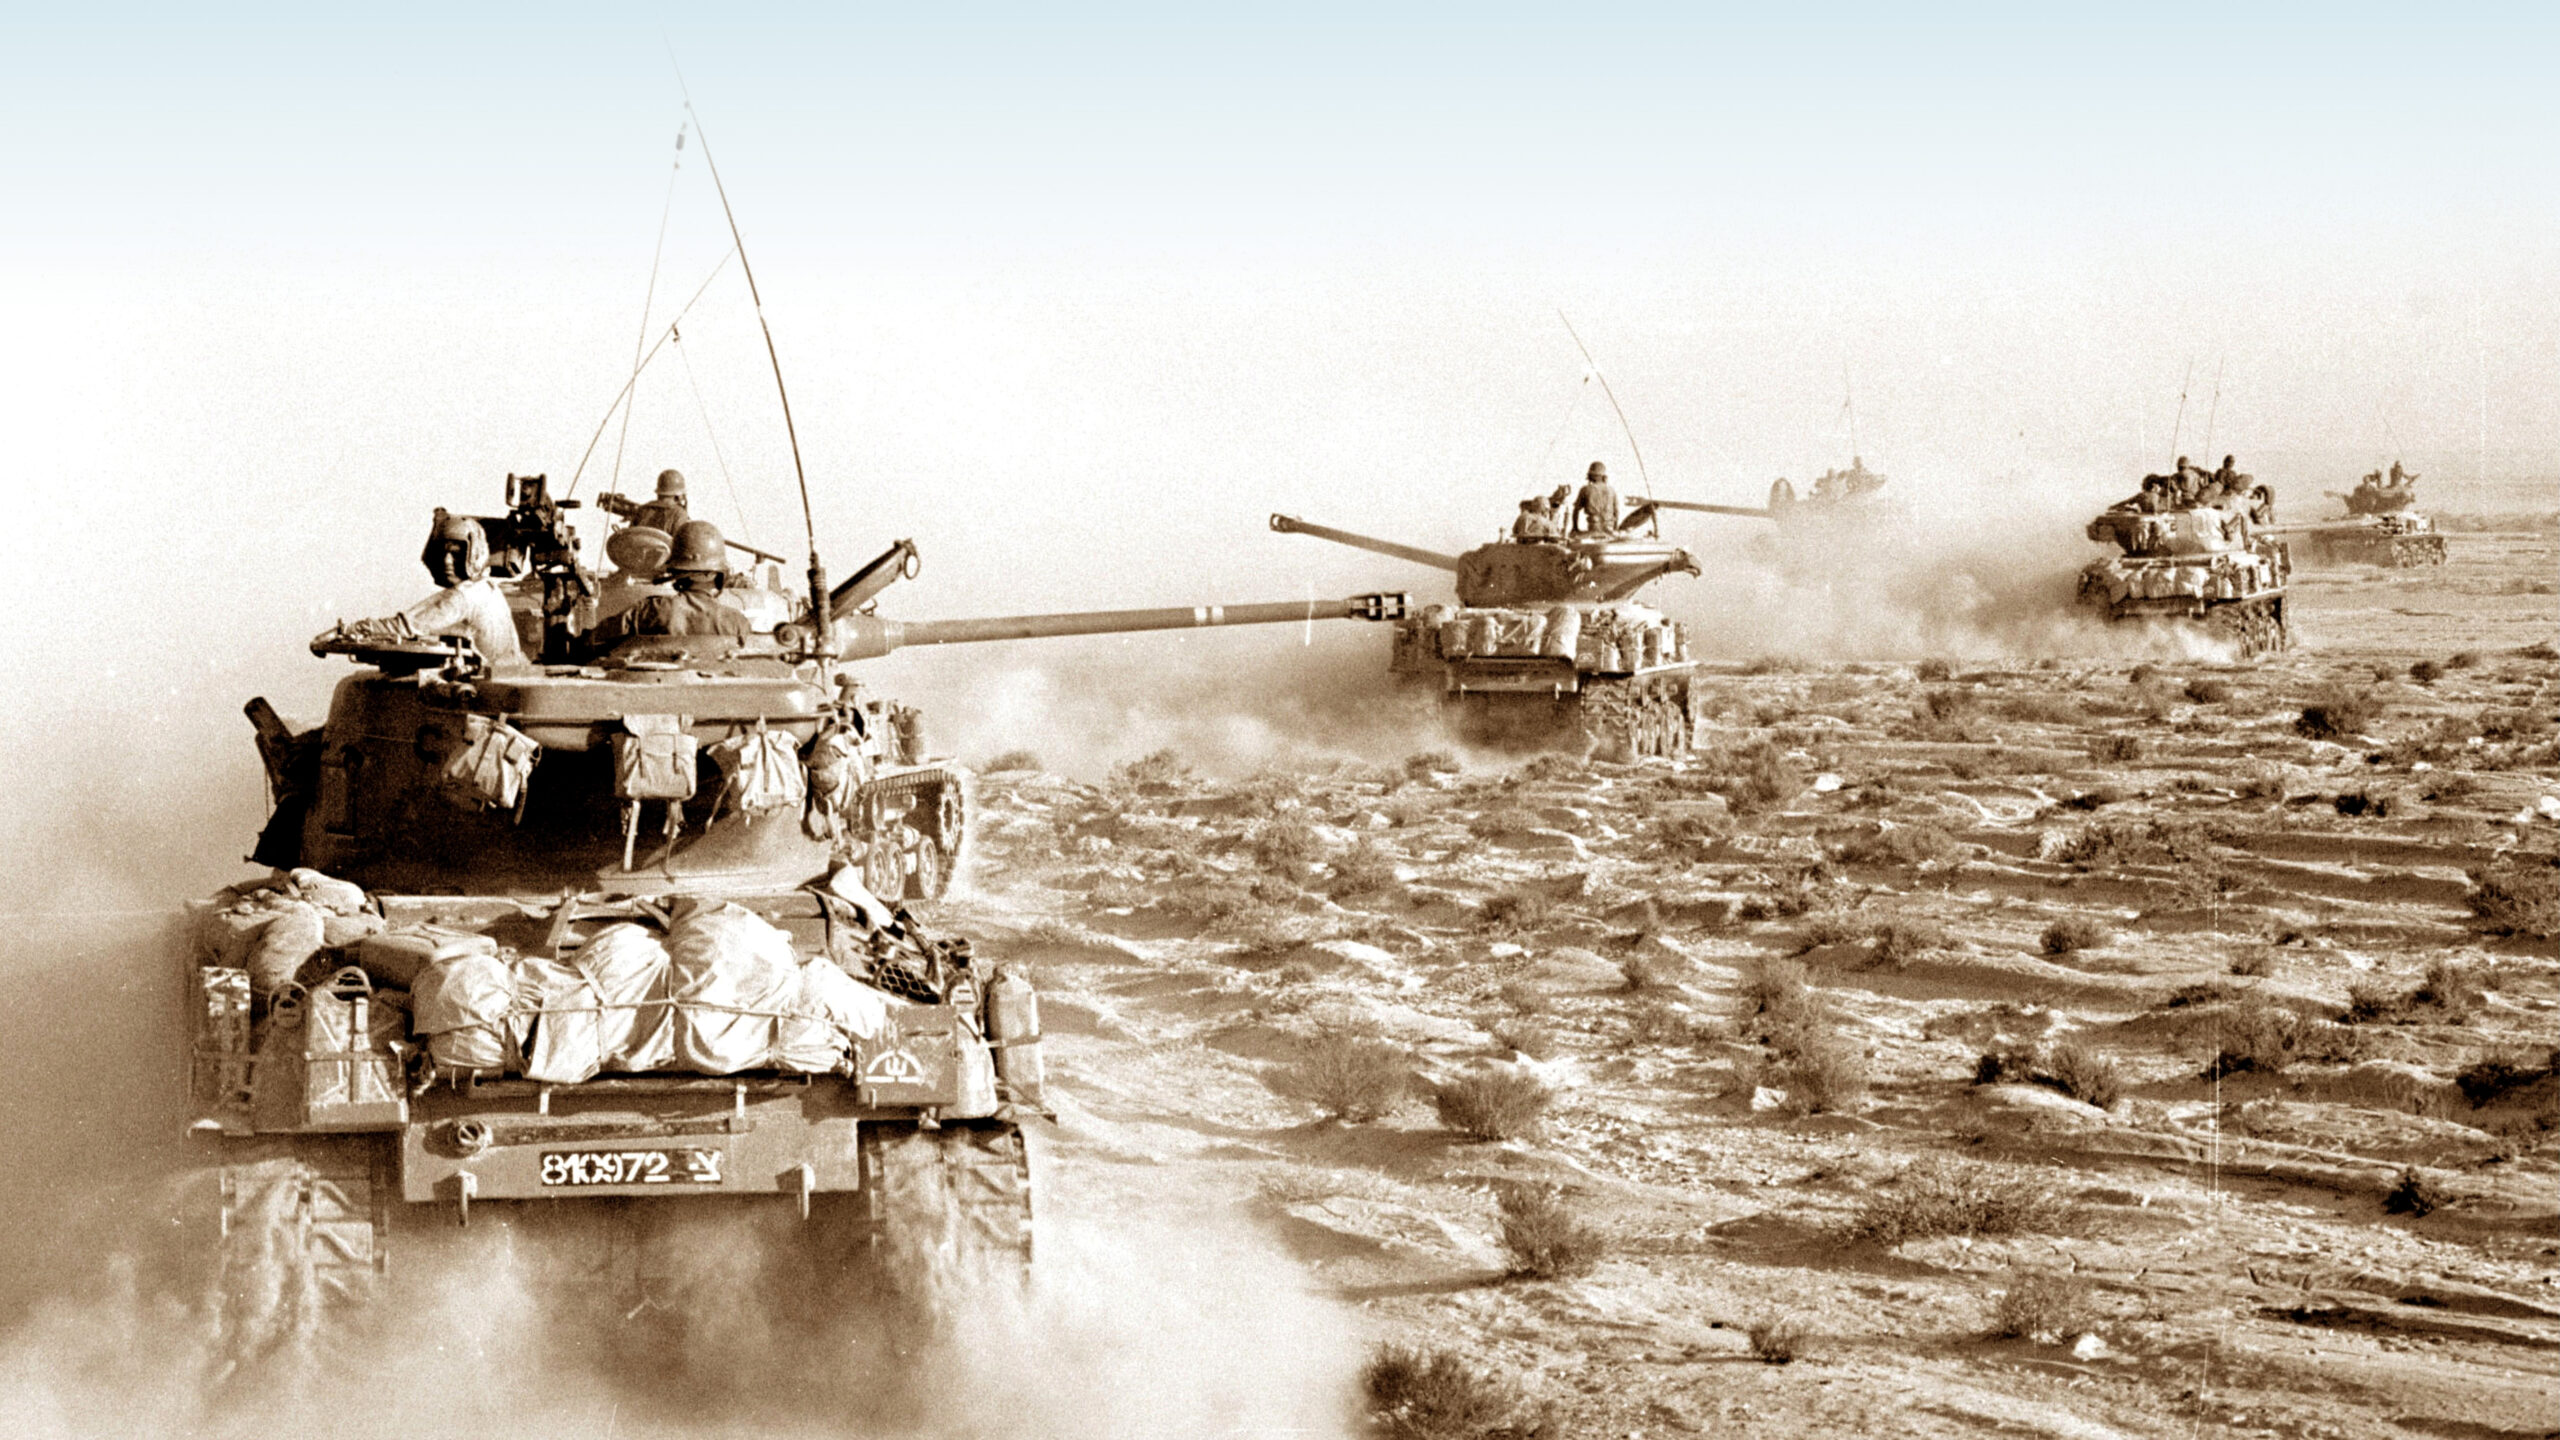 WWII Tanks Used by the Israeli Defense Force - Warfare History Network